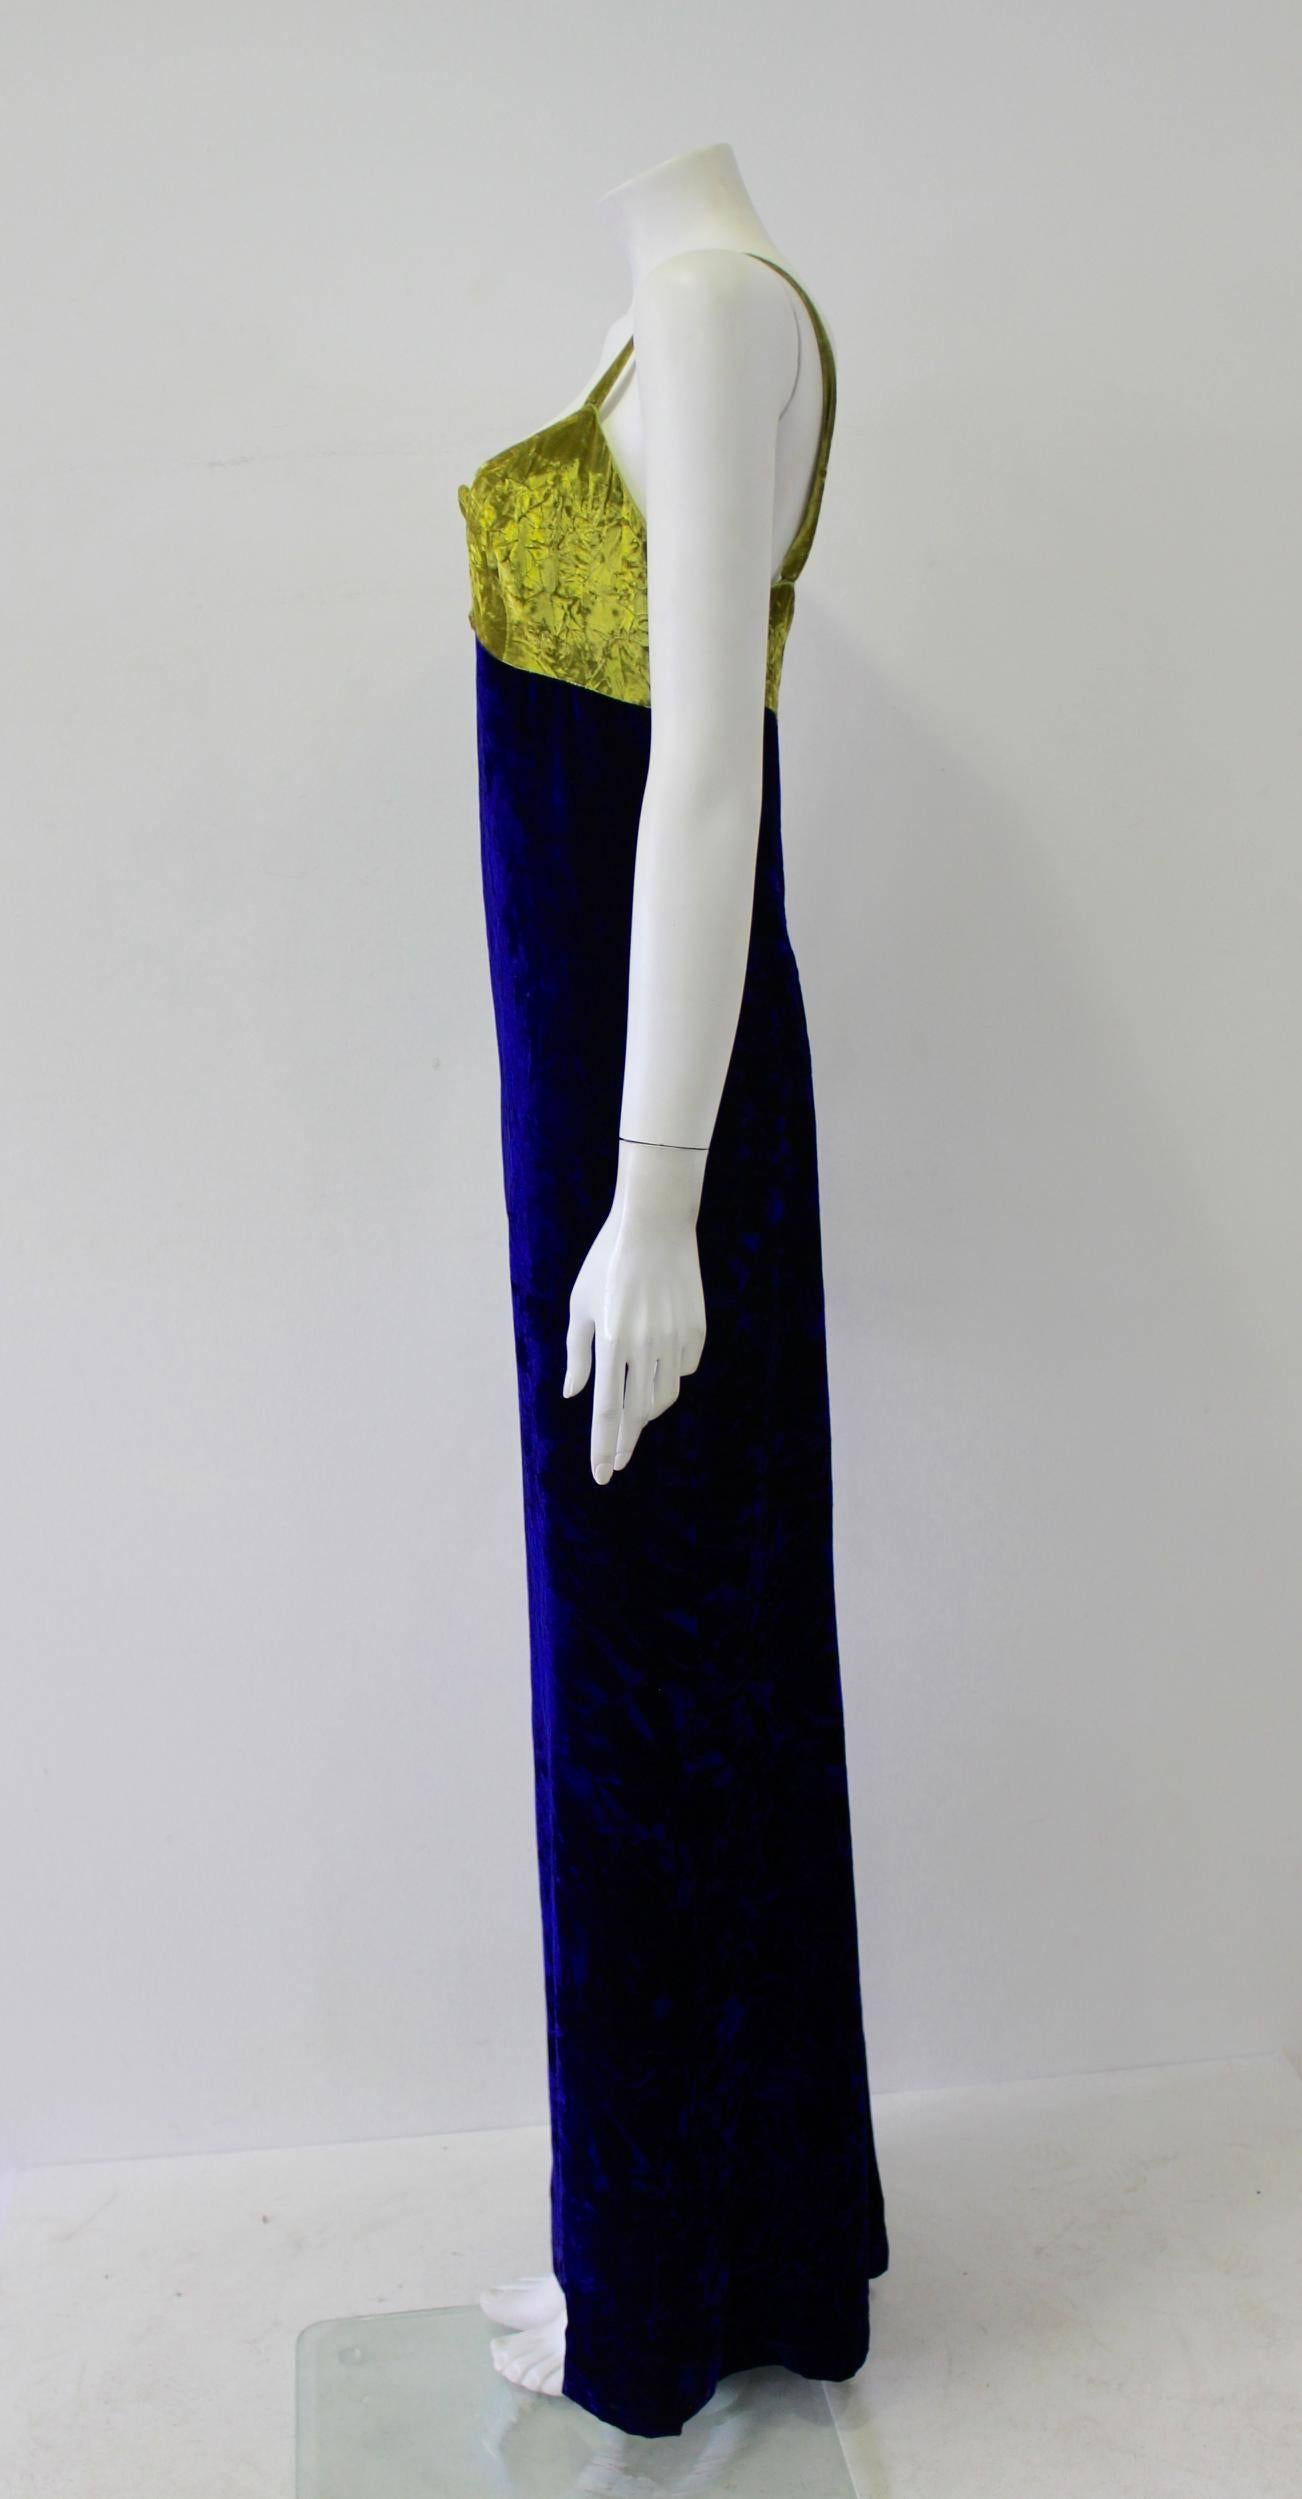 Black Gianni Versace Istante Crushed Velvet Evening Dress Fall 1997 For Sale